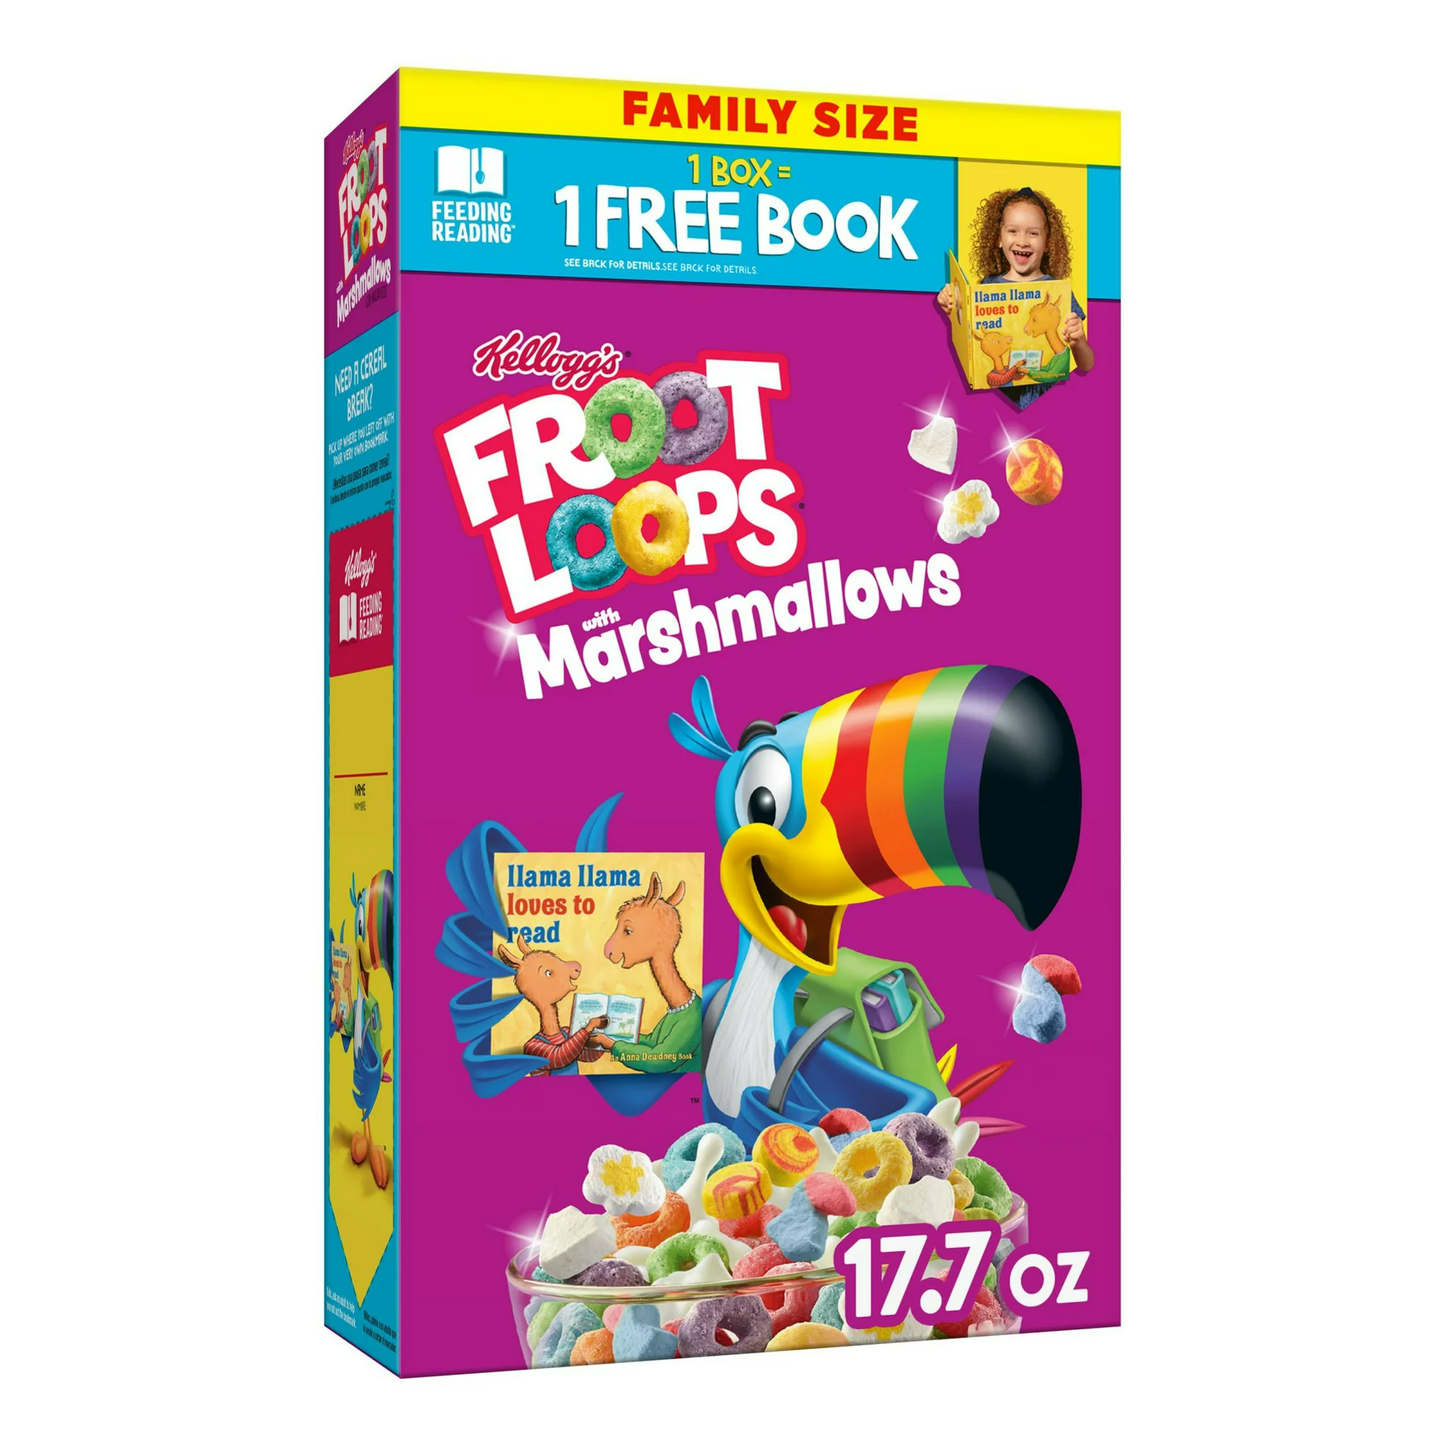 Kellogg's | Froot Loops Cereal with Marshmallows - Family Size, 17.7 oz